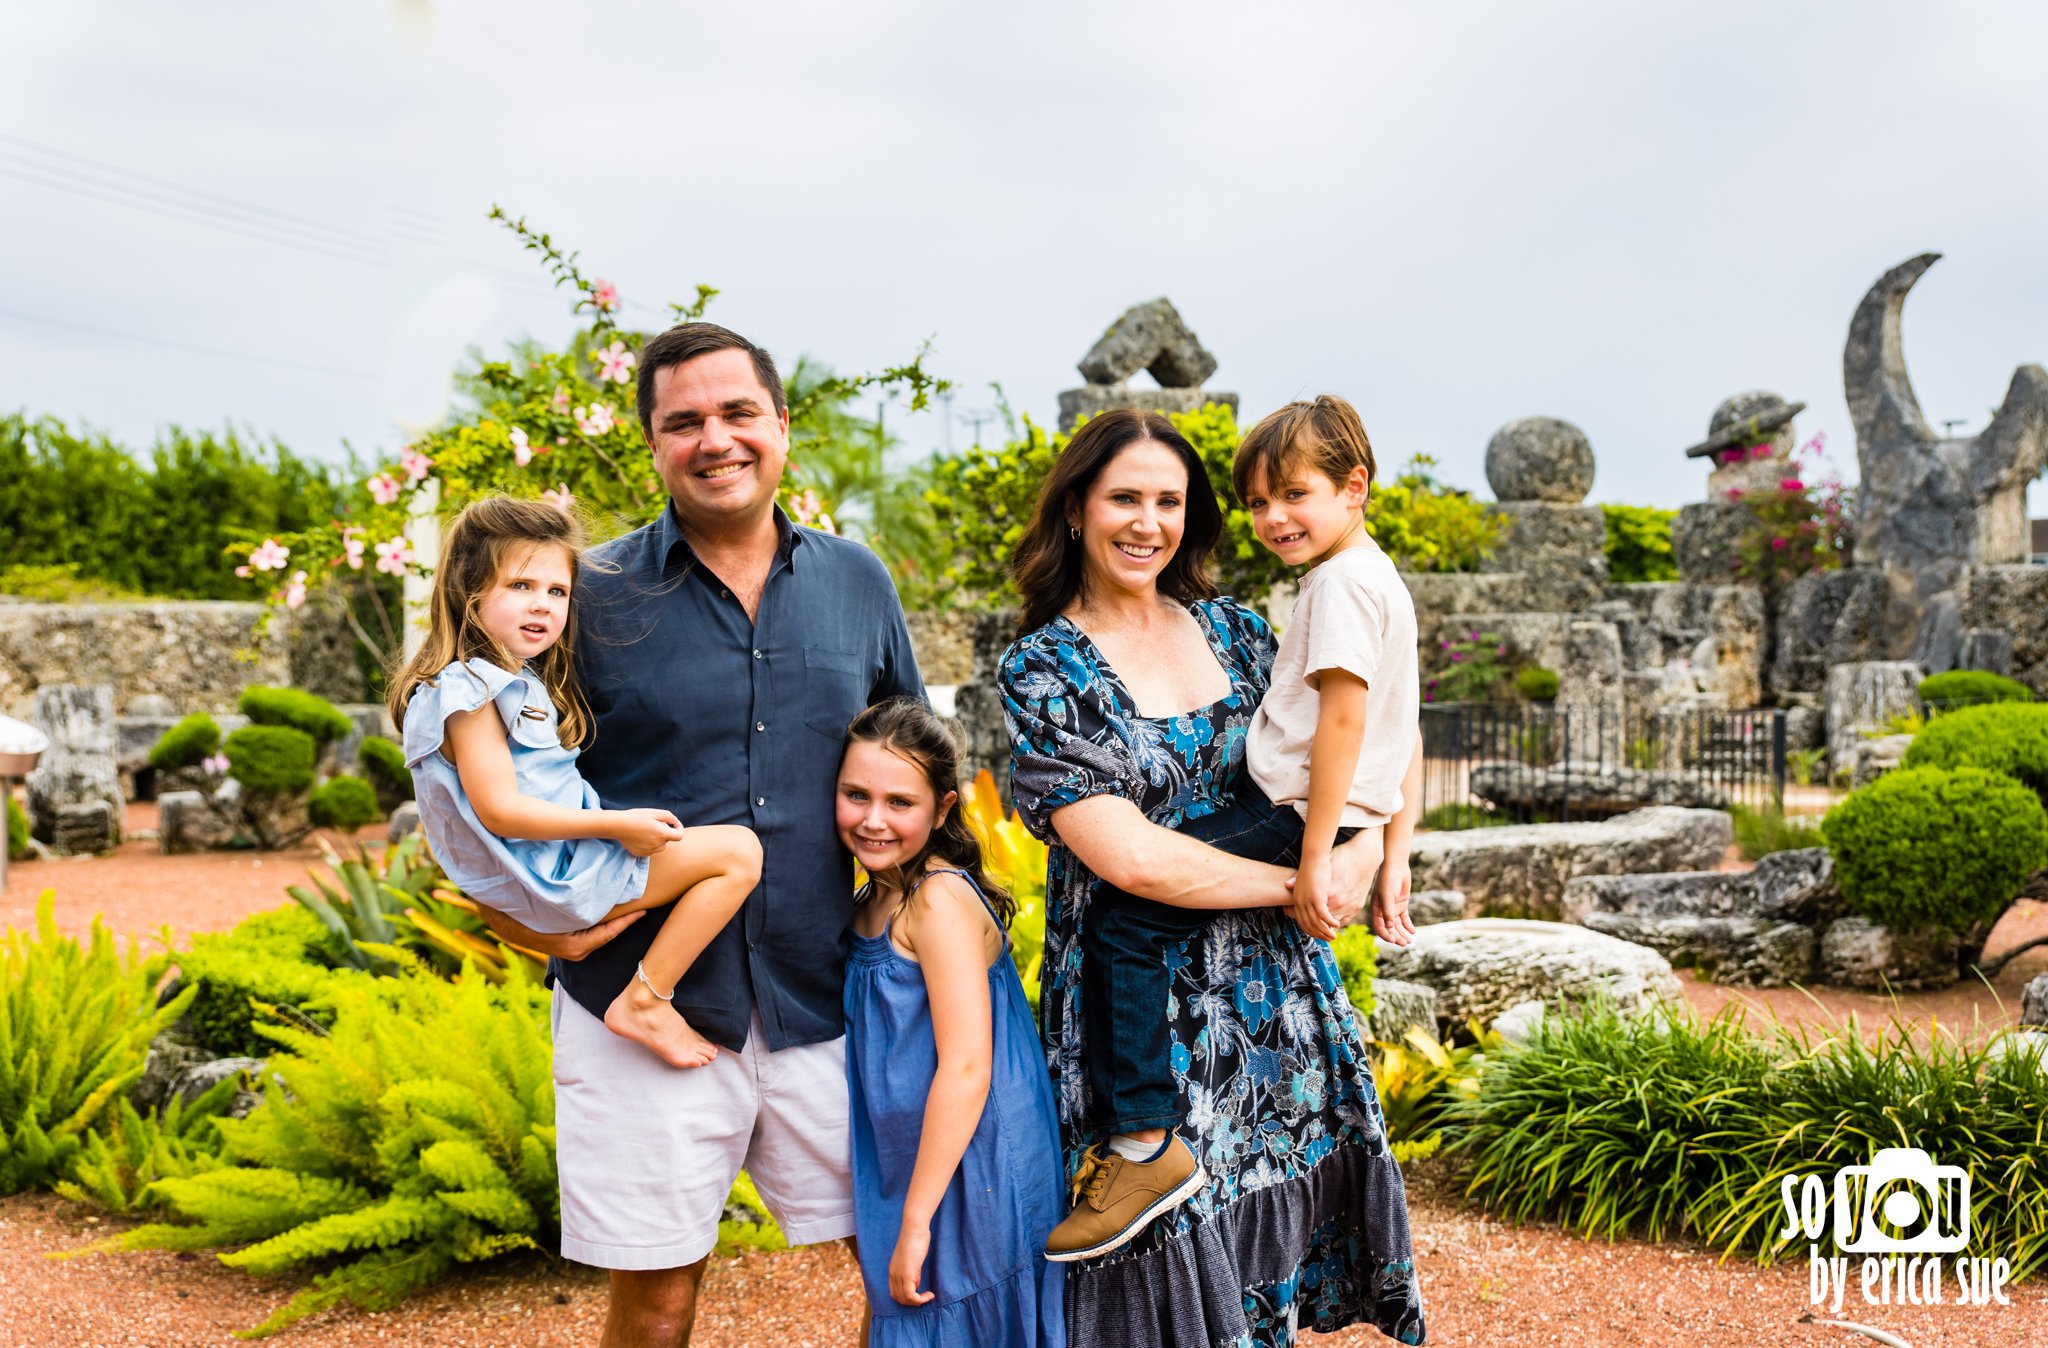 16-lifestyle-family-photographer-coral-castle-miami-fl-so-you-by-erica-sue-ES2_9328-Edit.jpg